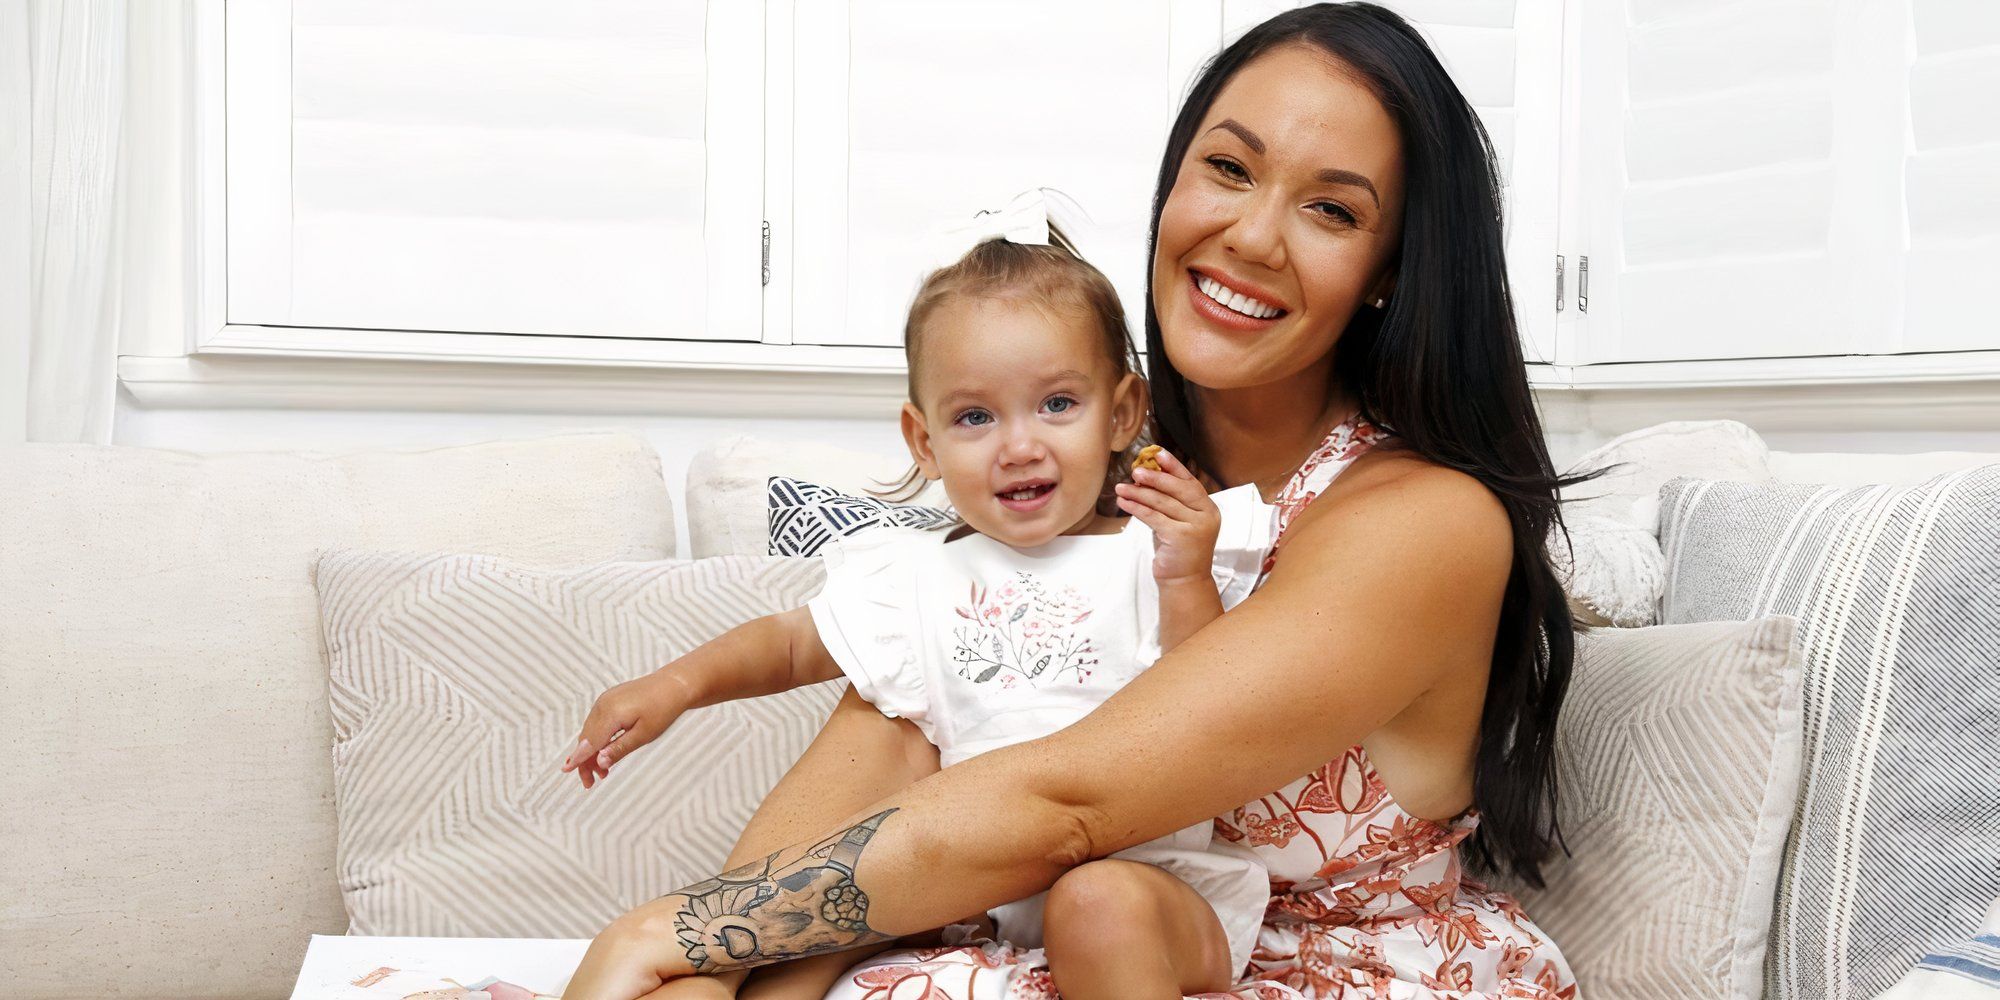 Married At First Sight's Davina Rankin with daughter Mila-Mae.